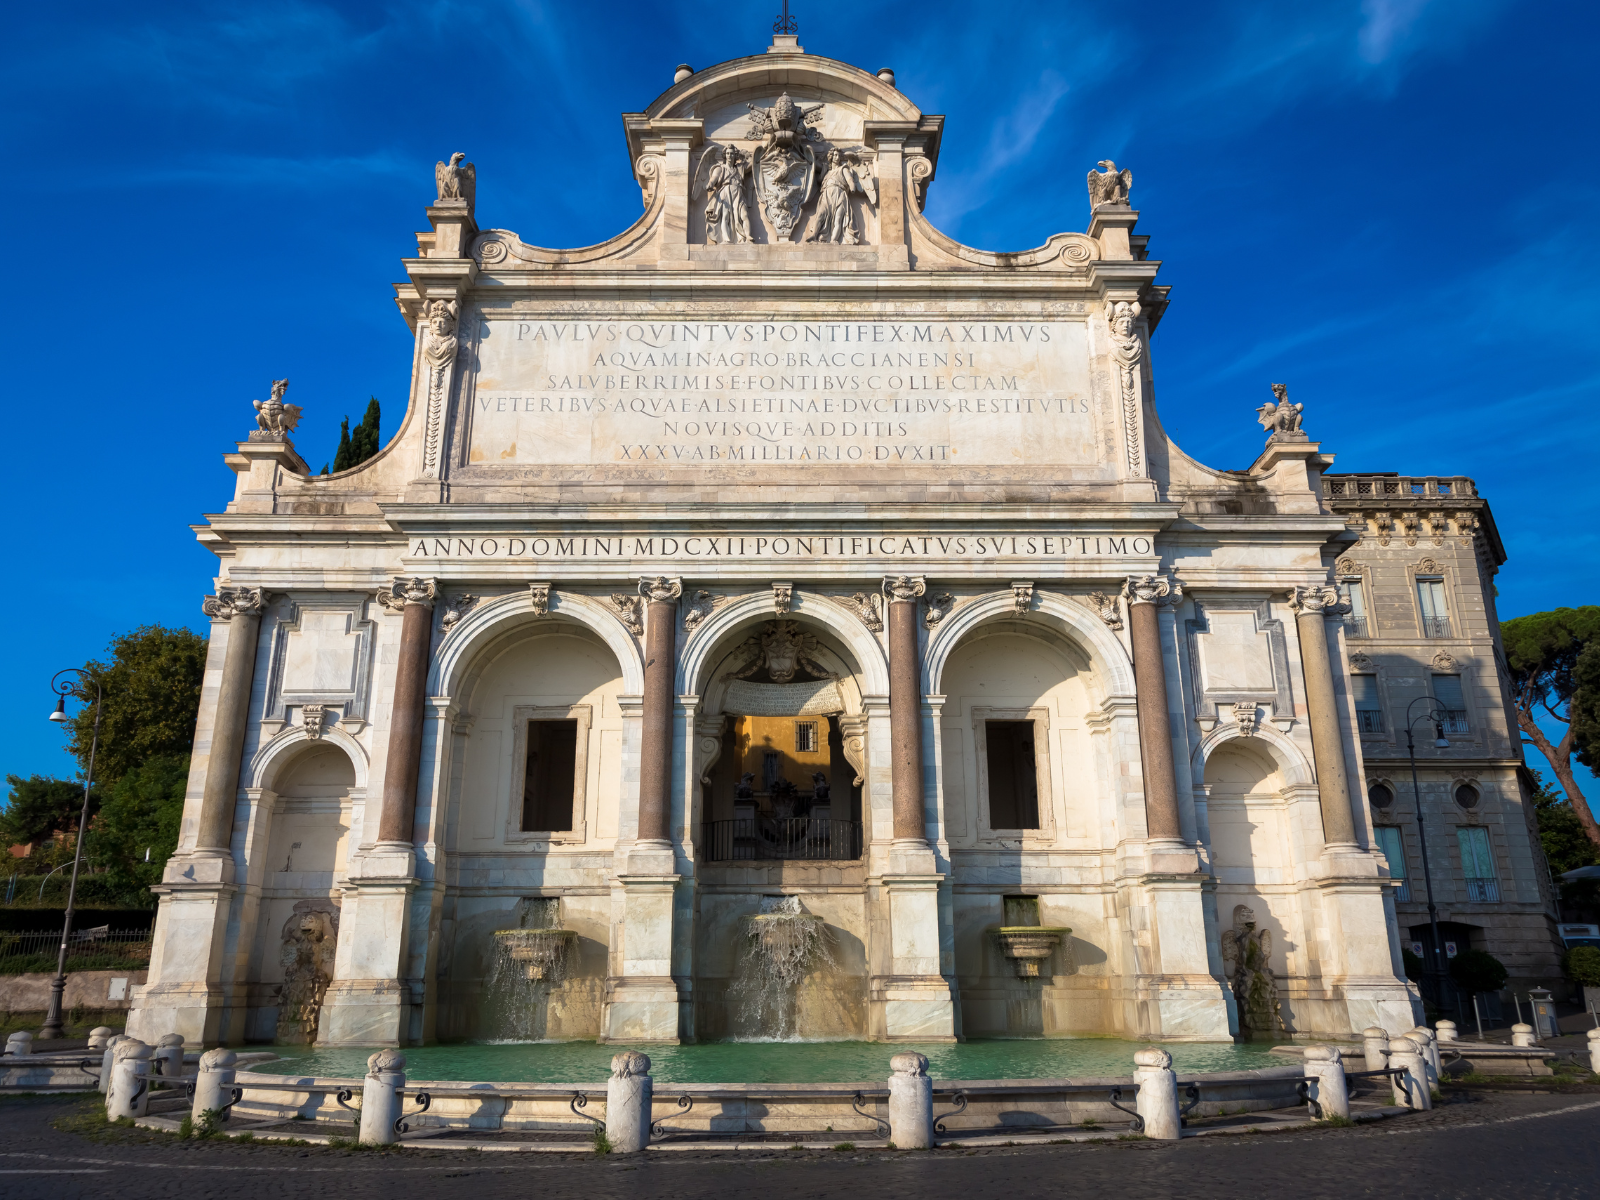 The Fontana dell’Acqua Paola is undoubtedly one of Rome's most beautiful fountains.